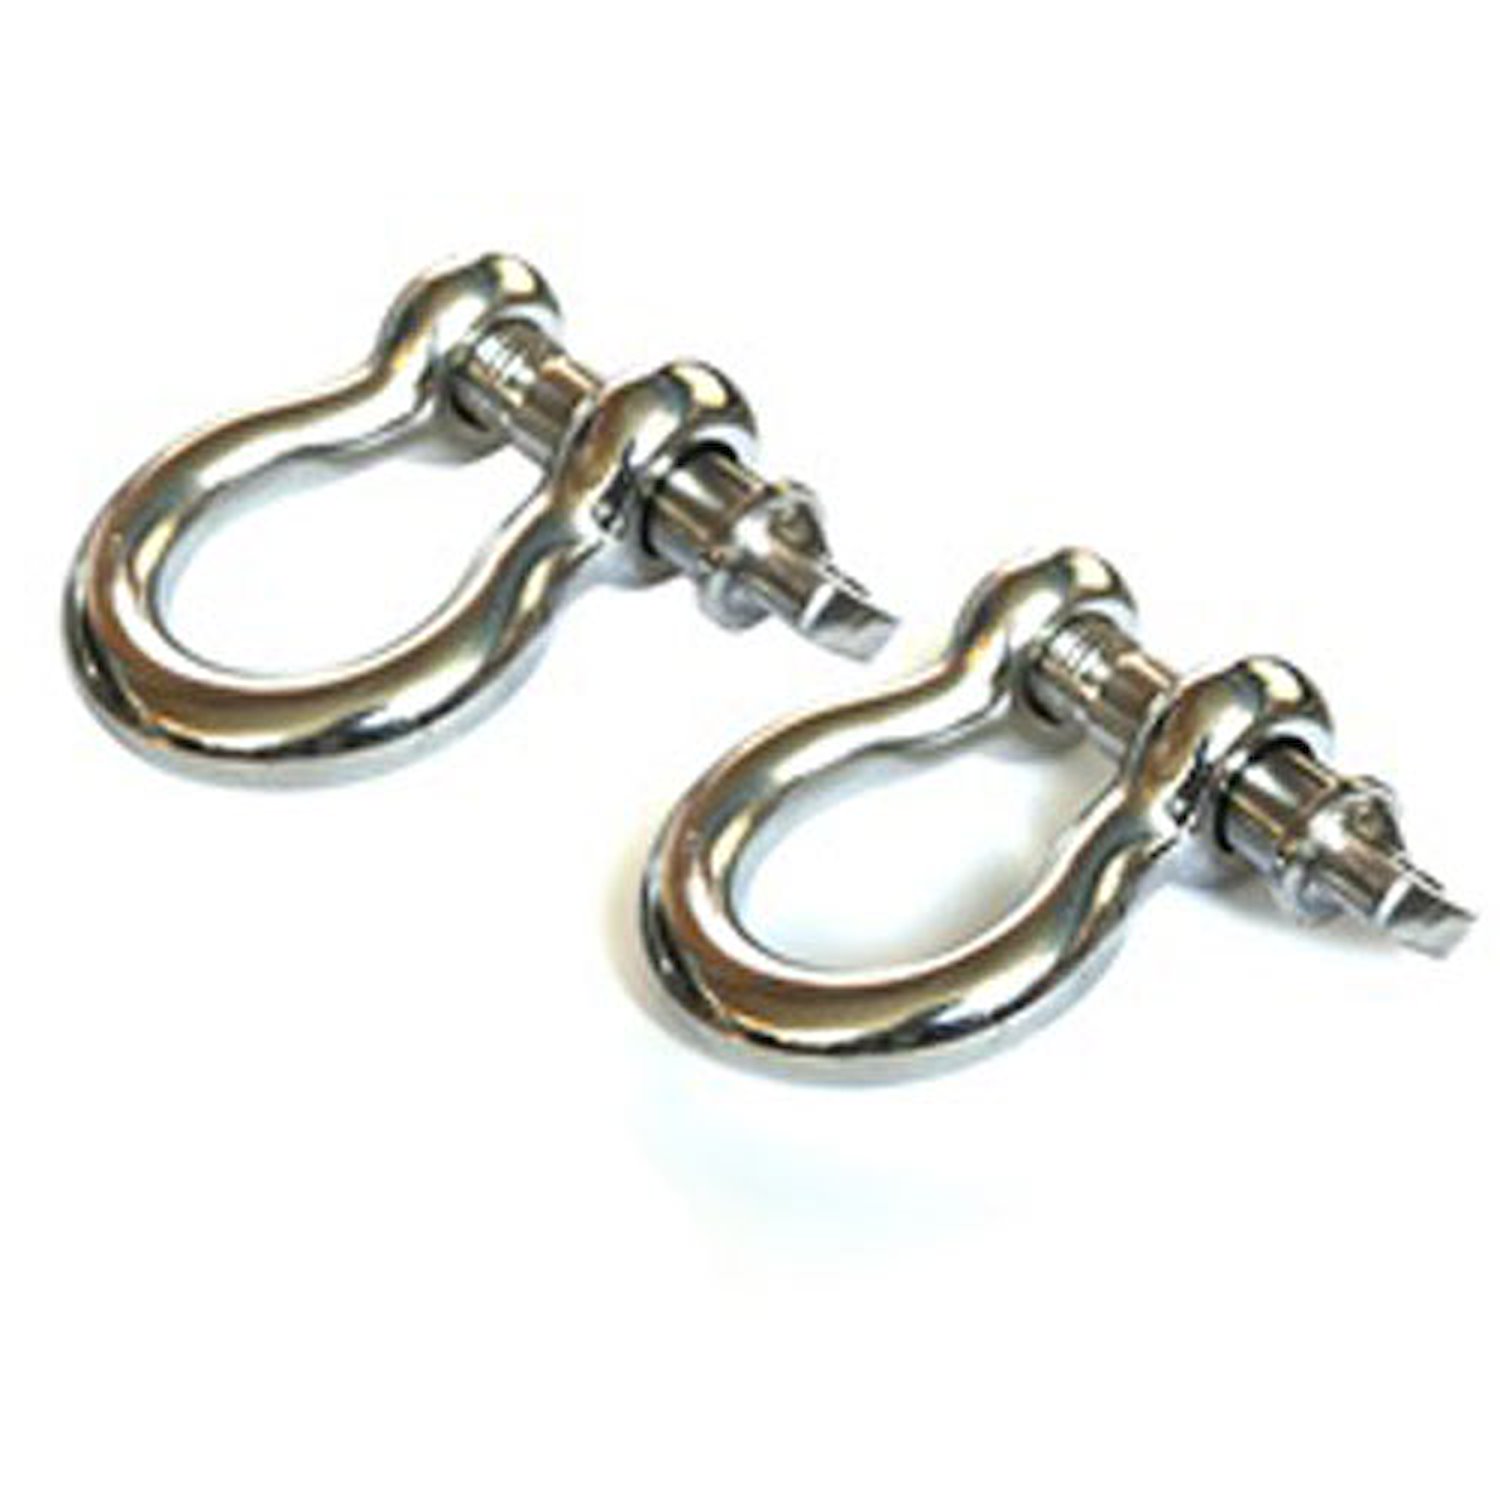 D-SHACKLES  STAINLESS STE